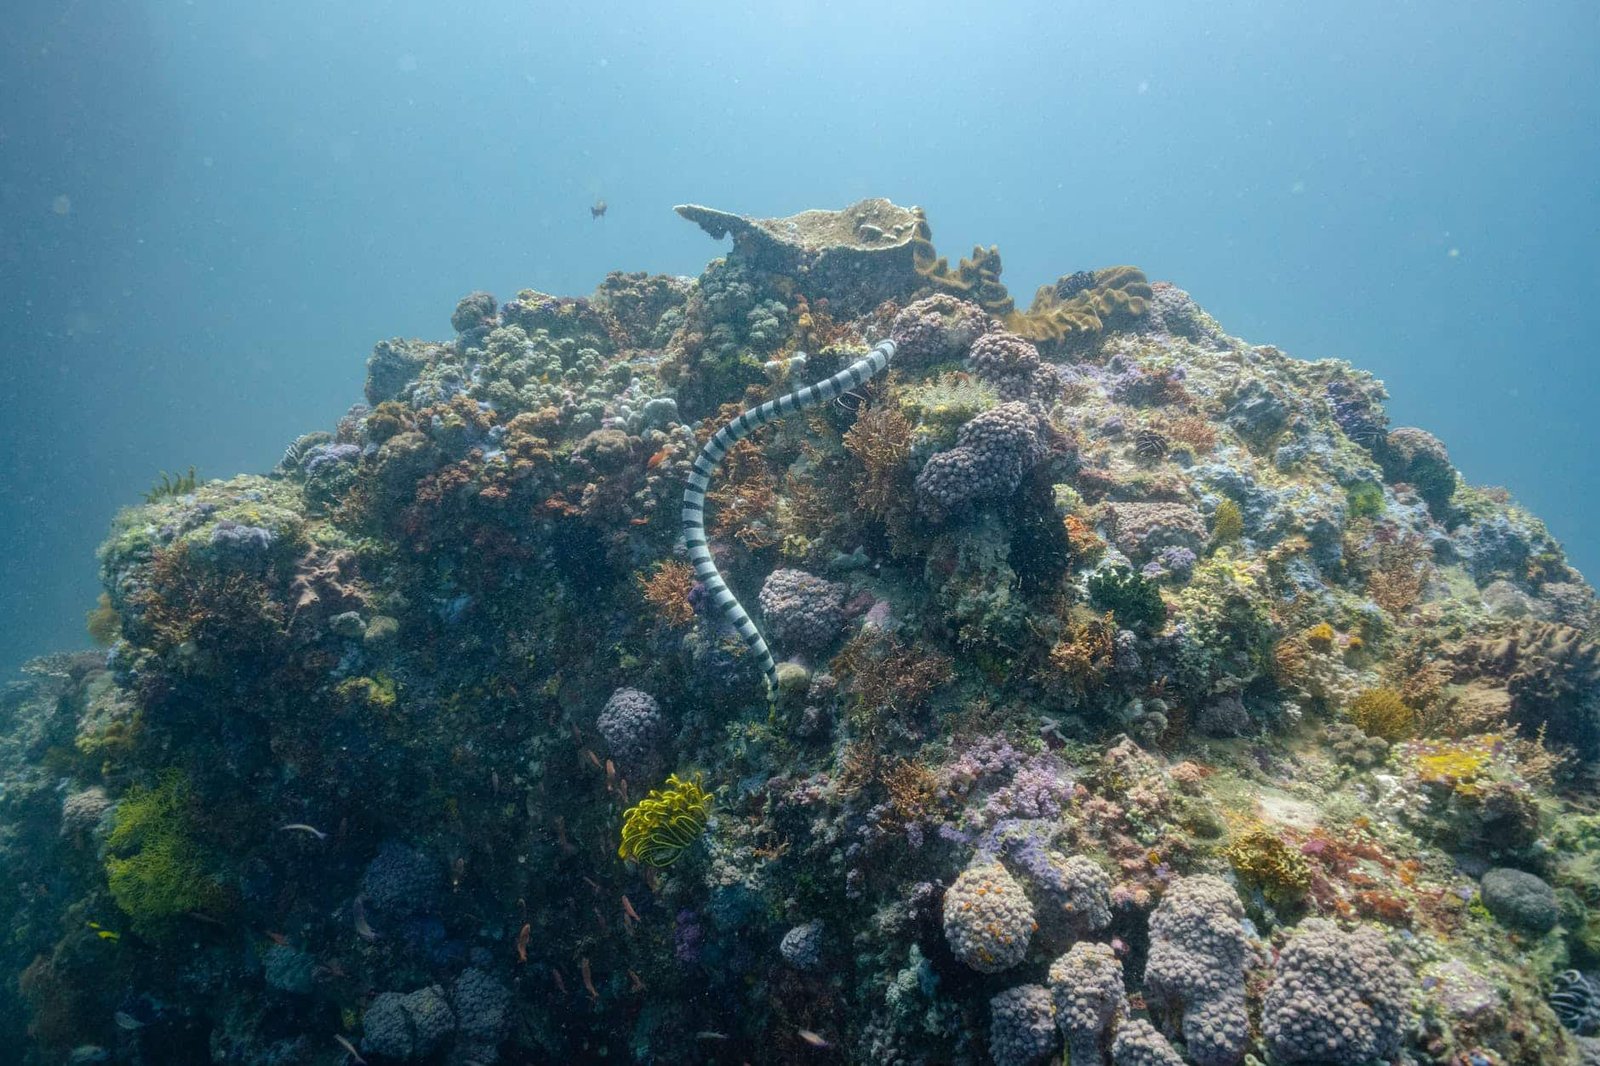 sea snake swimming above coral reefs under water